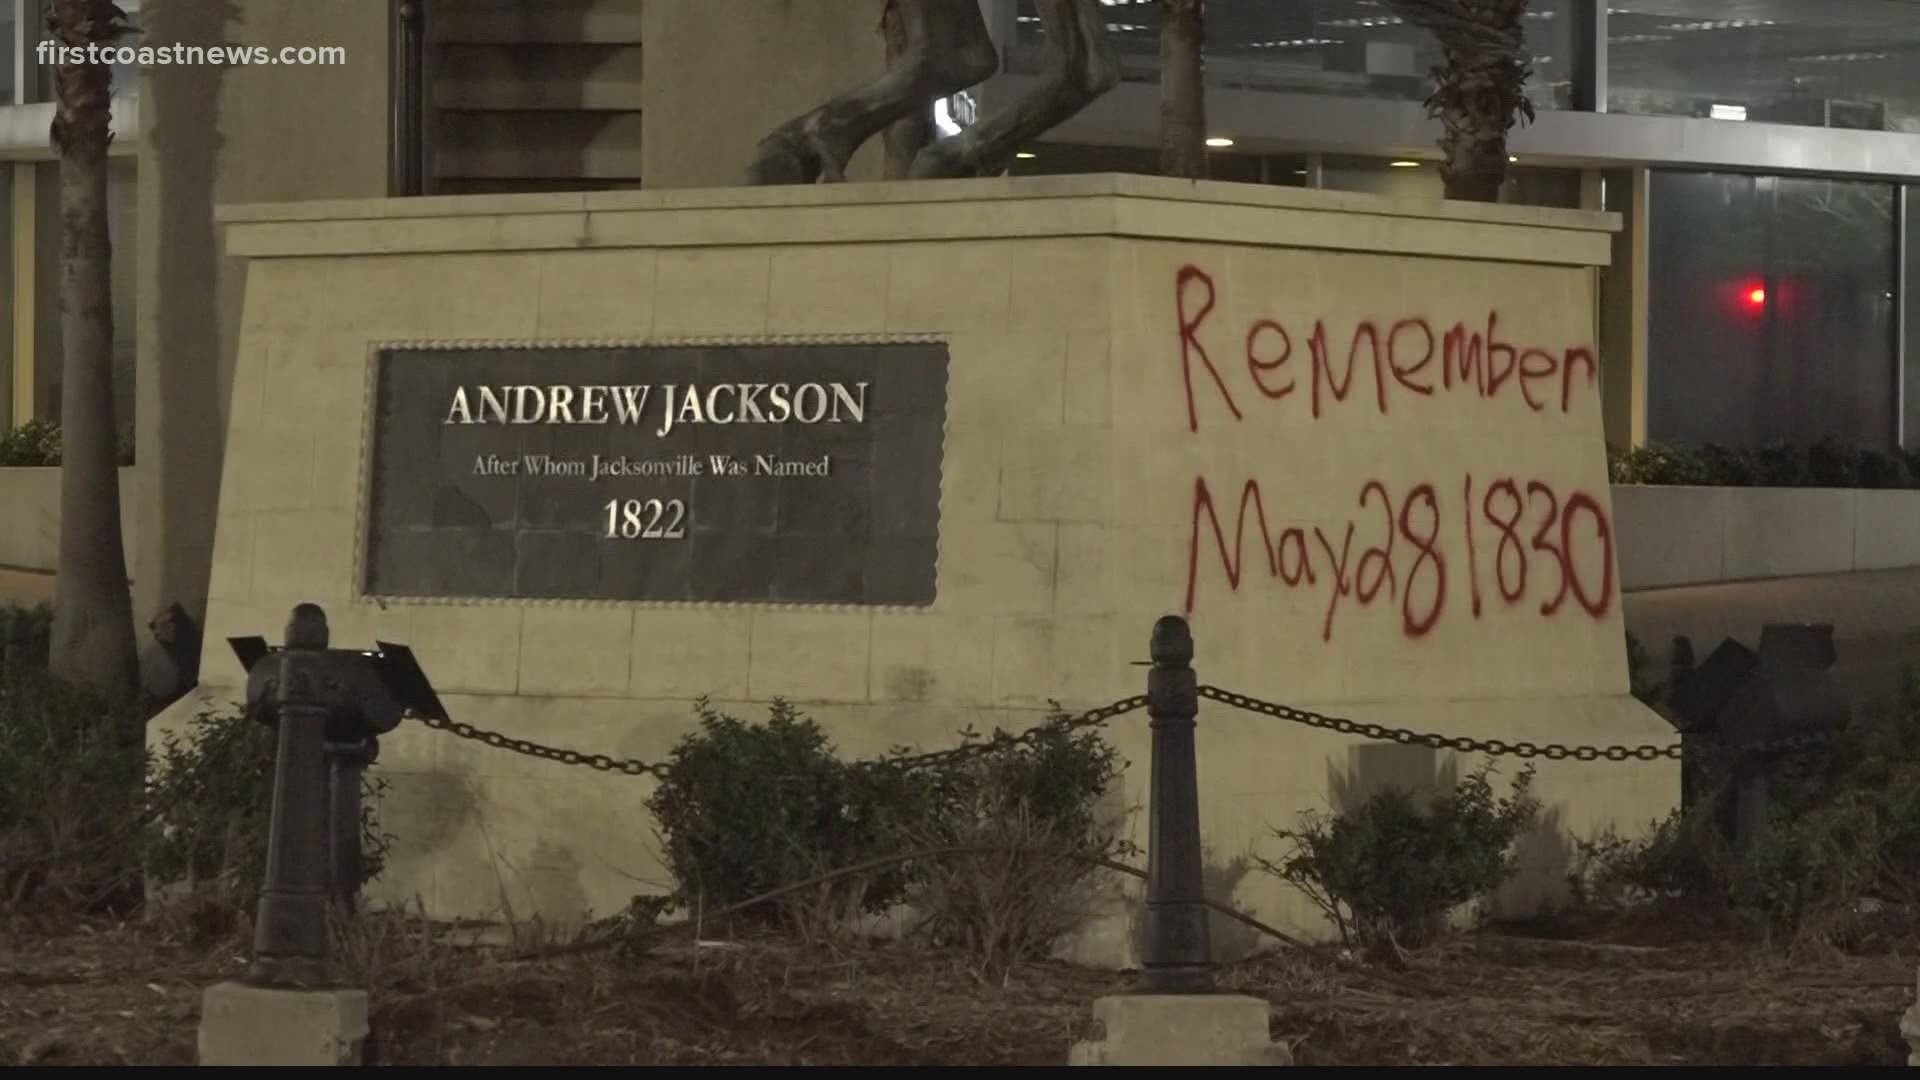 On Tuesday morning, First Coast News spotted what appears to be red paint spray-painted on the statue with the words: "Remember May 28, 1830."